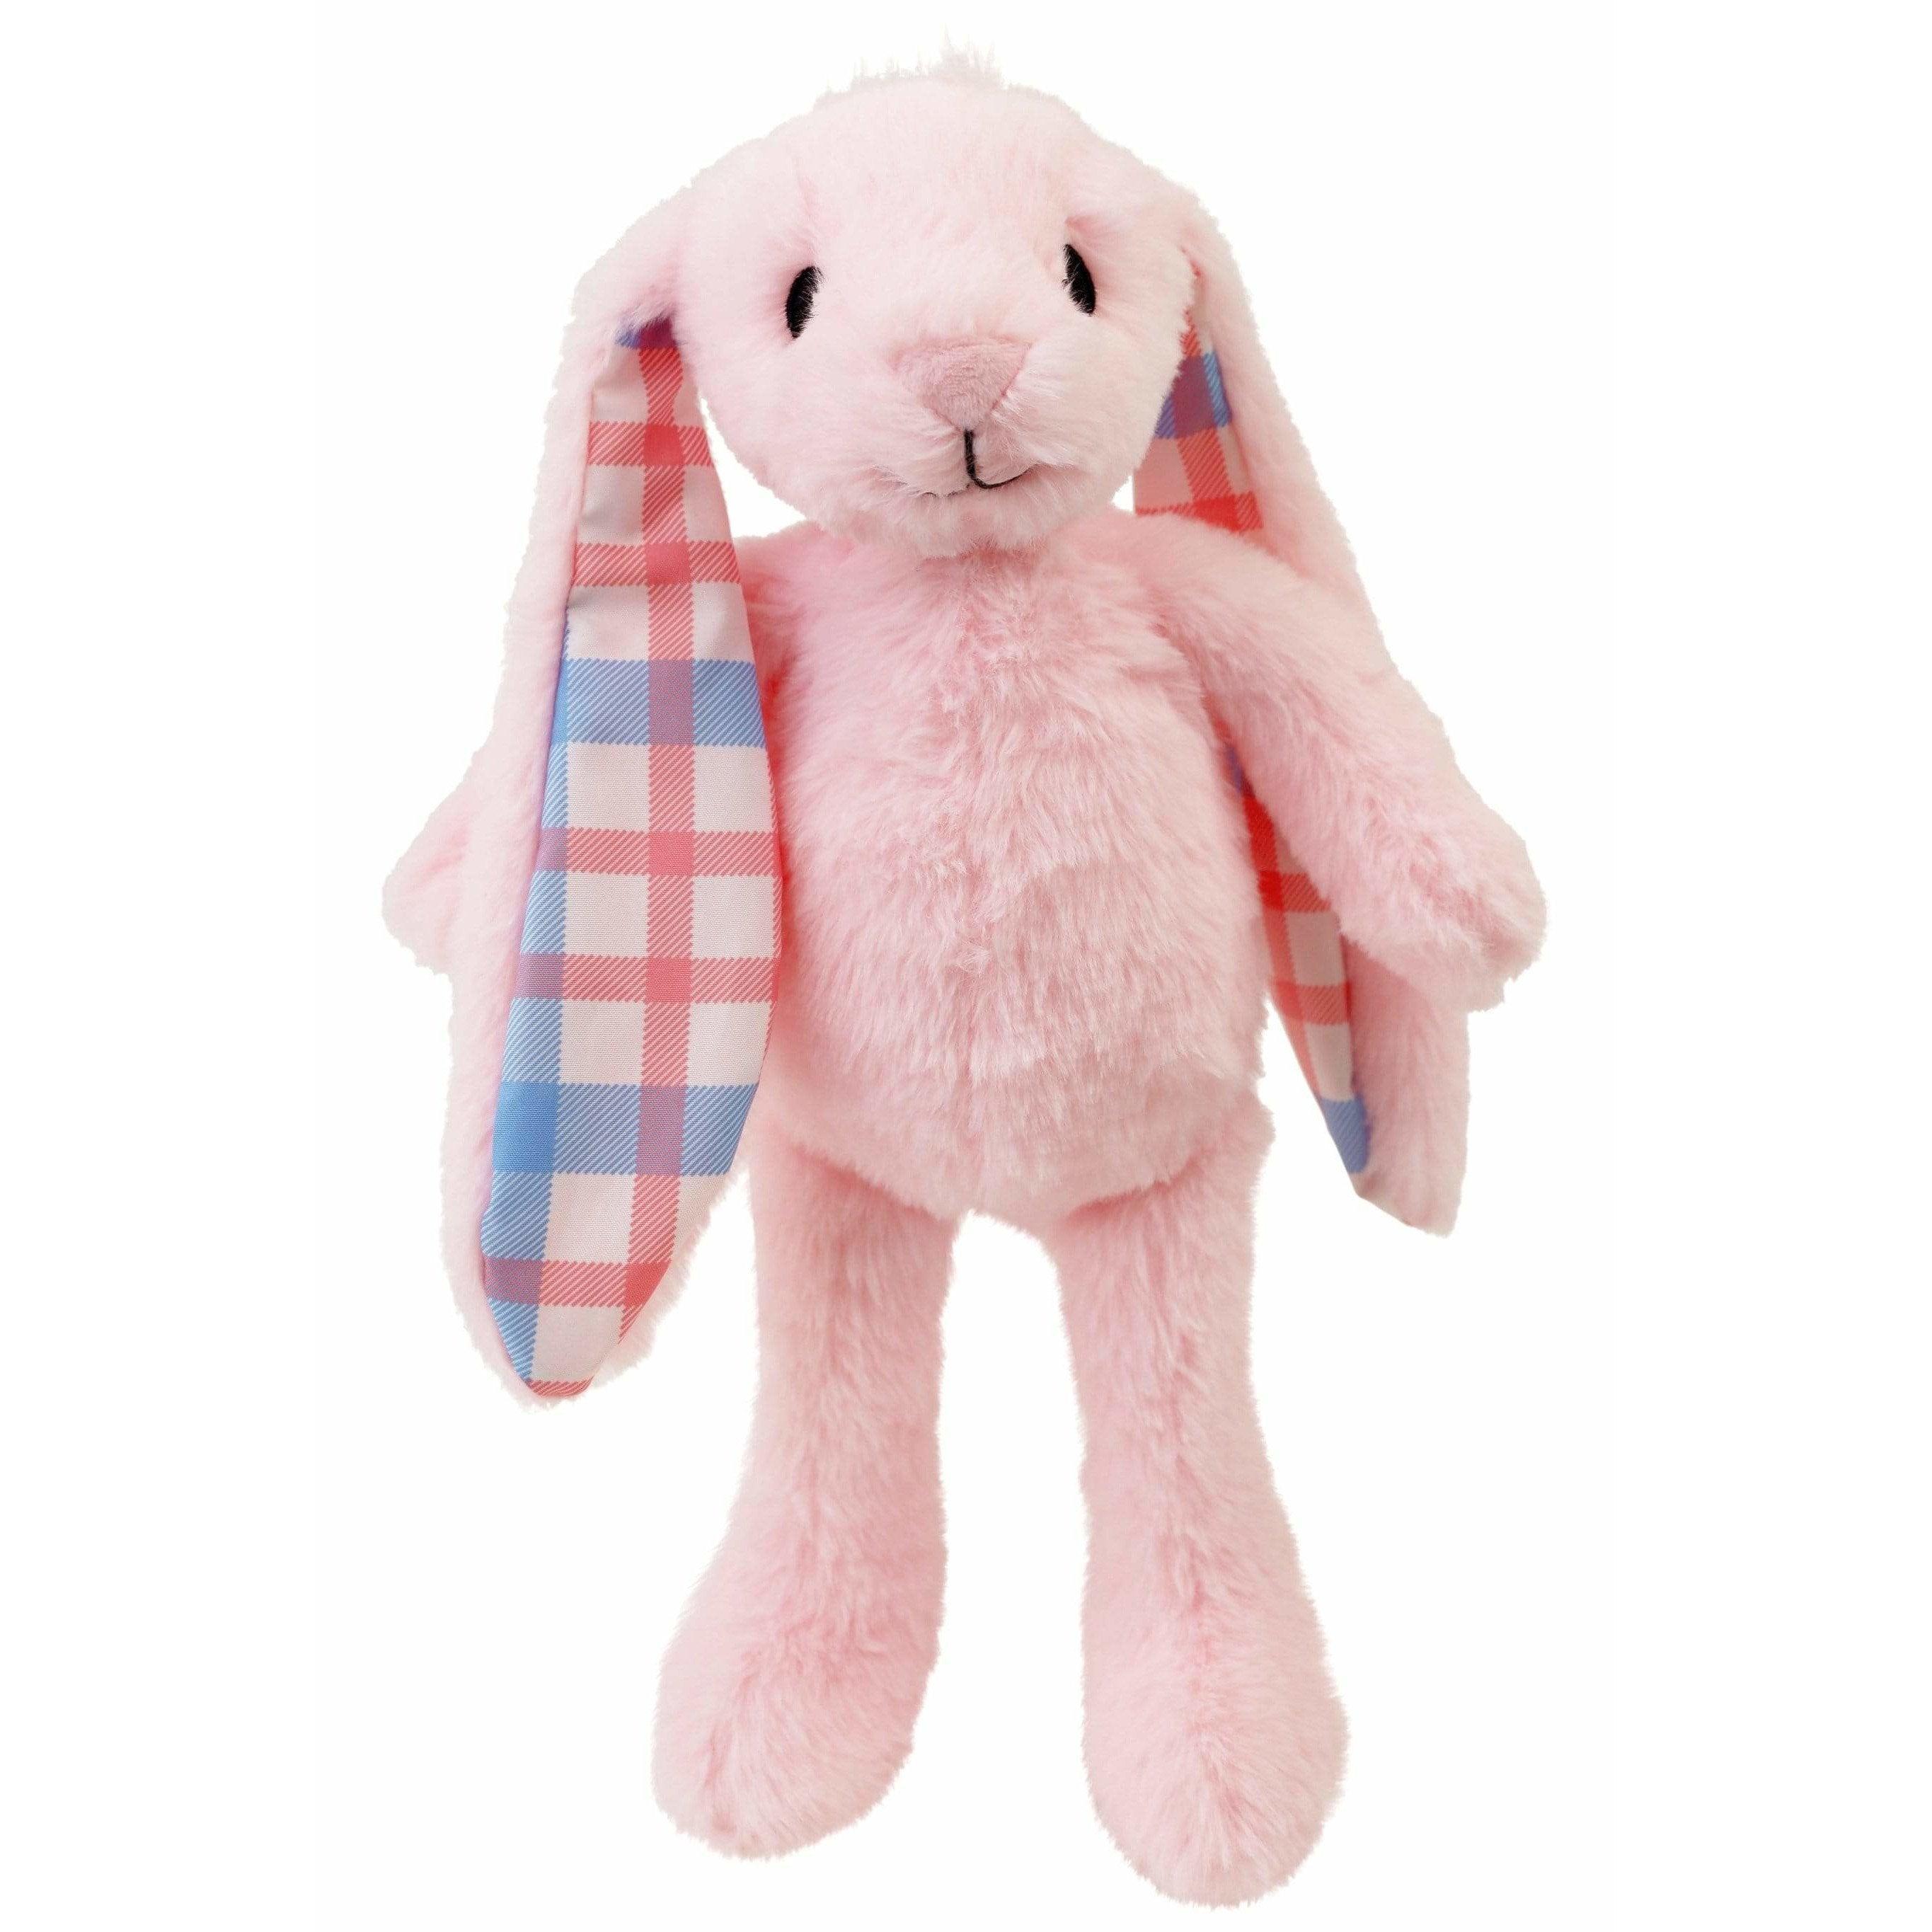 Cute Stuffed Easter Bunny -18, Pink, Large, Heirloom Quality